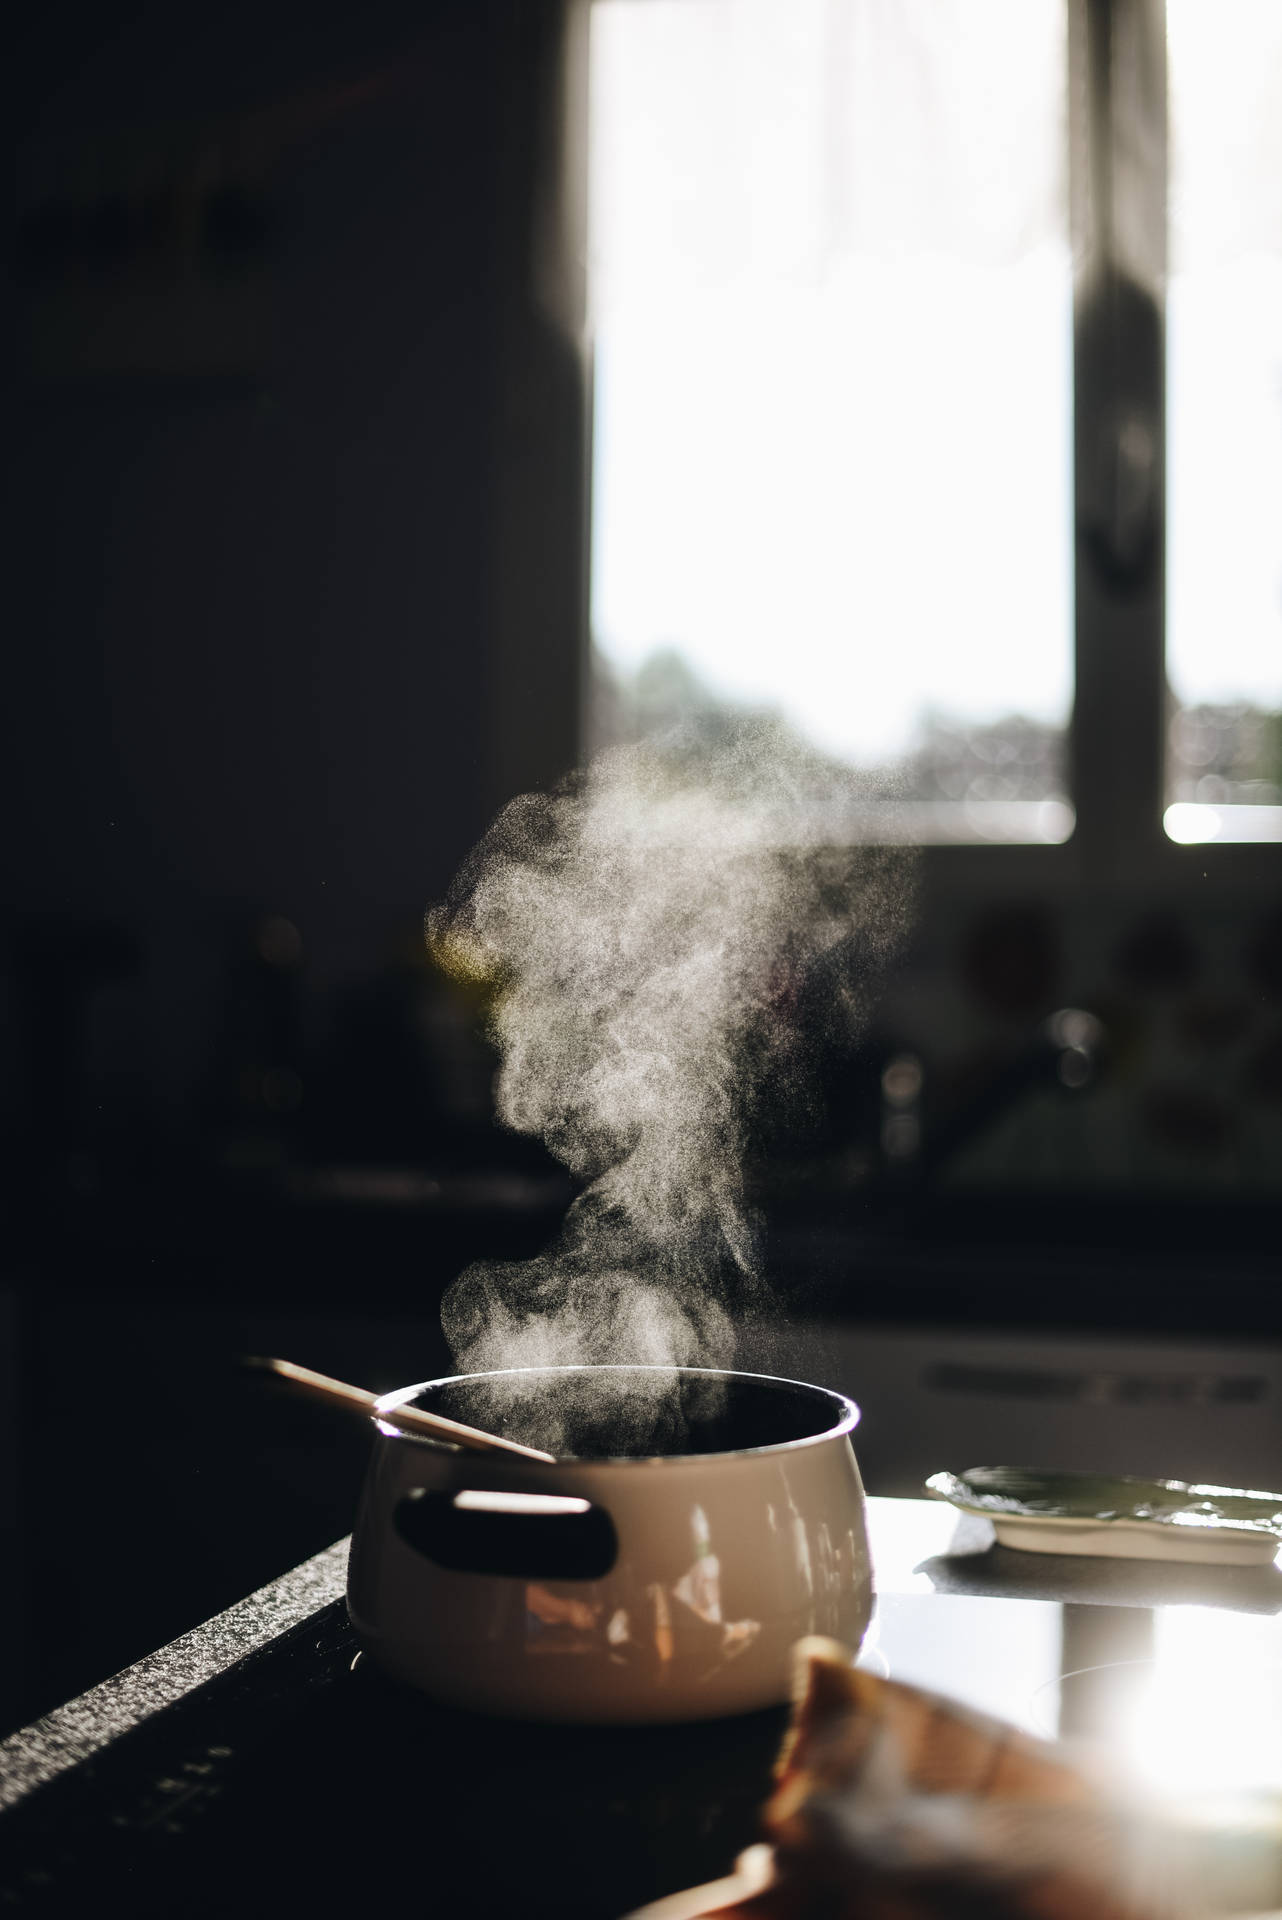 Steam Rises From A Simmering Pot Of Flavorful Concoction.